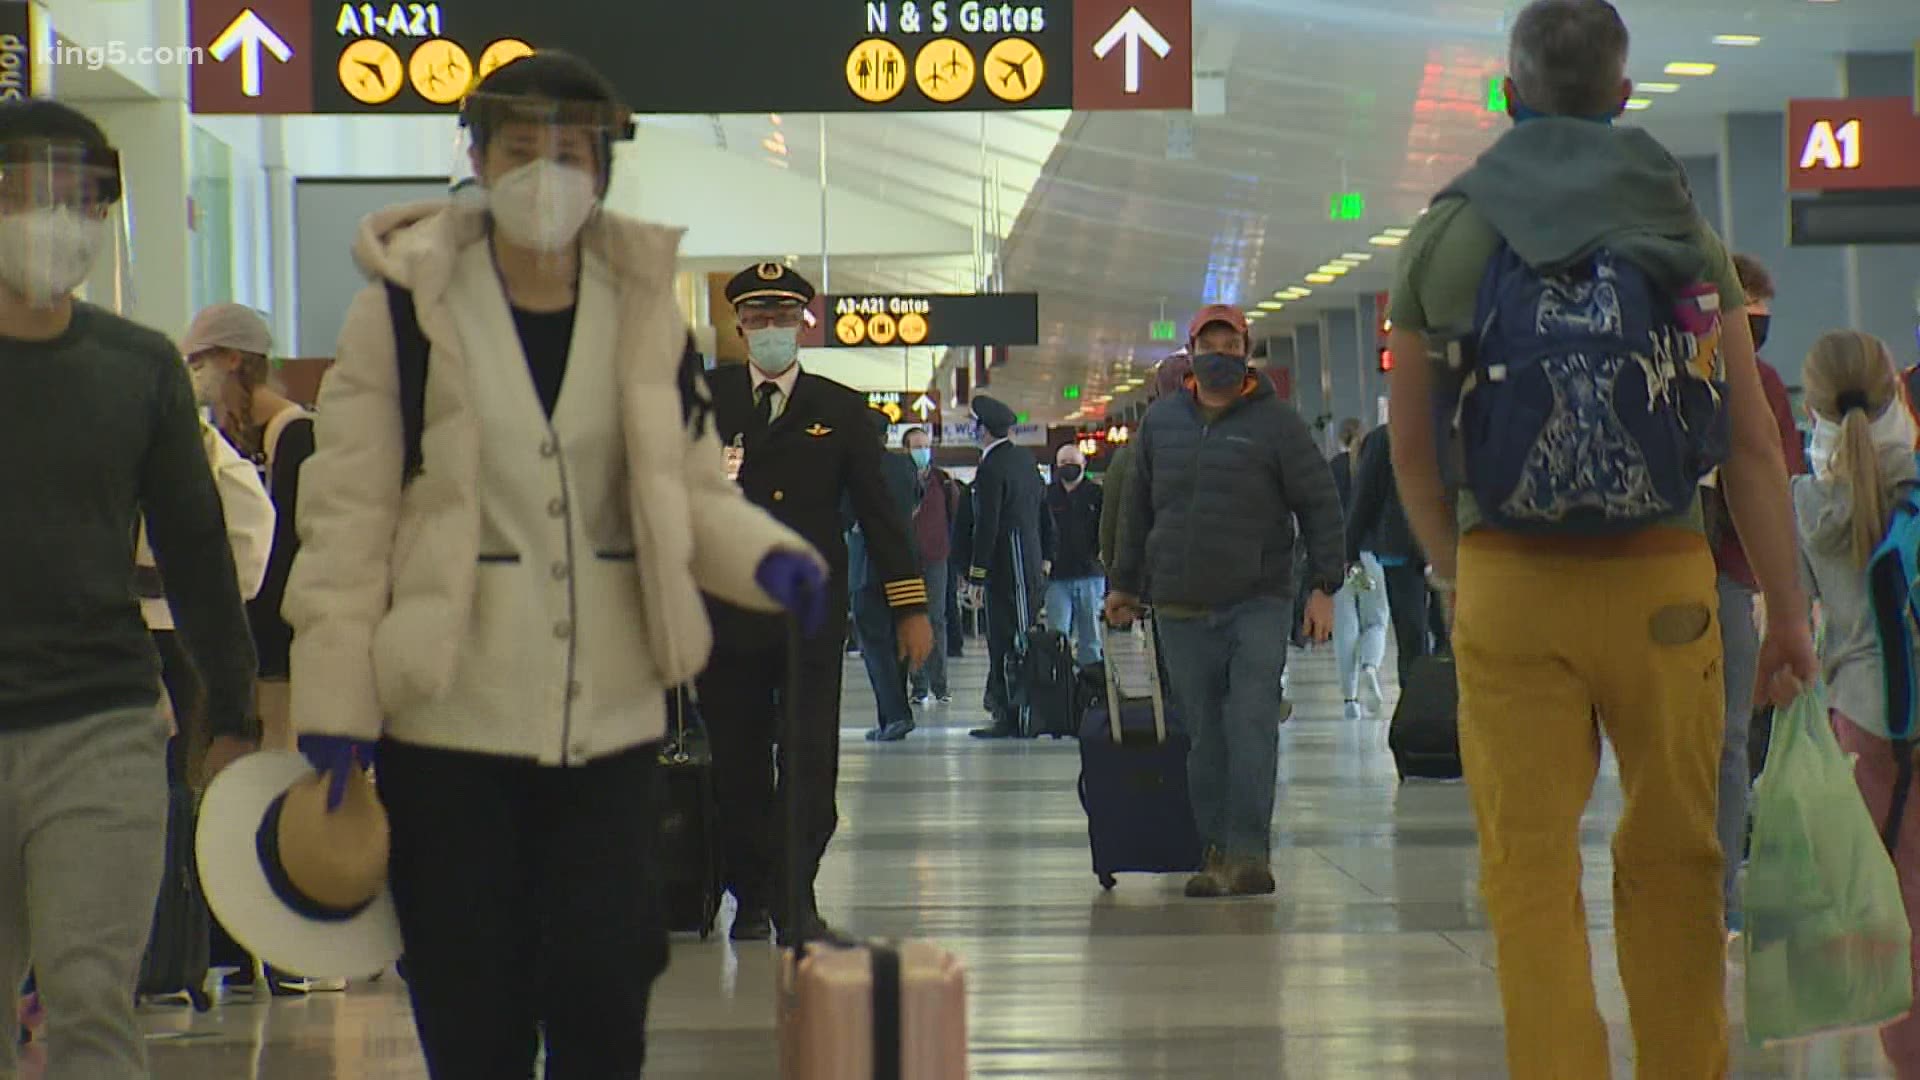 Before travel advisories were issued, Sea-Tac Airport estimated a 45% increase in travelers for the upcoming holiday but that number has since dropped to about 20%.